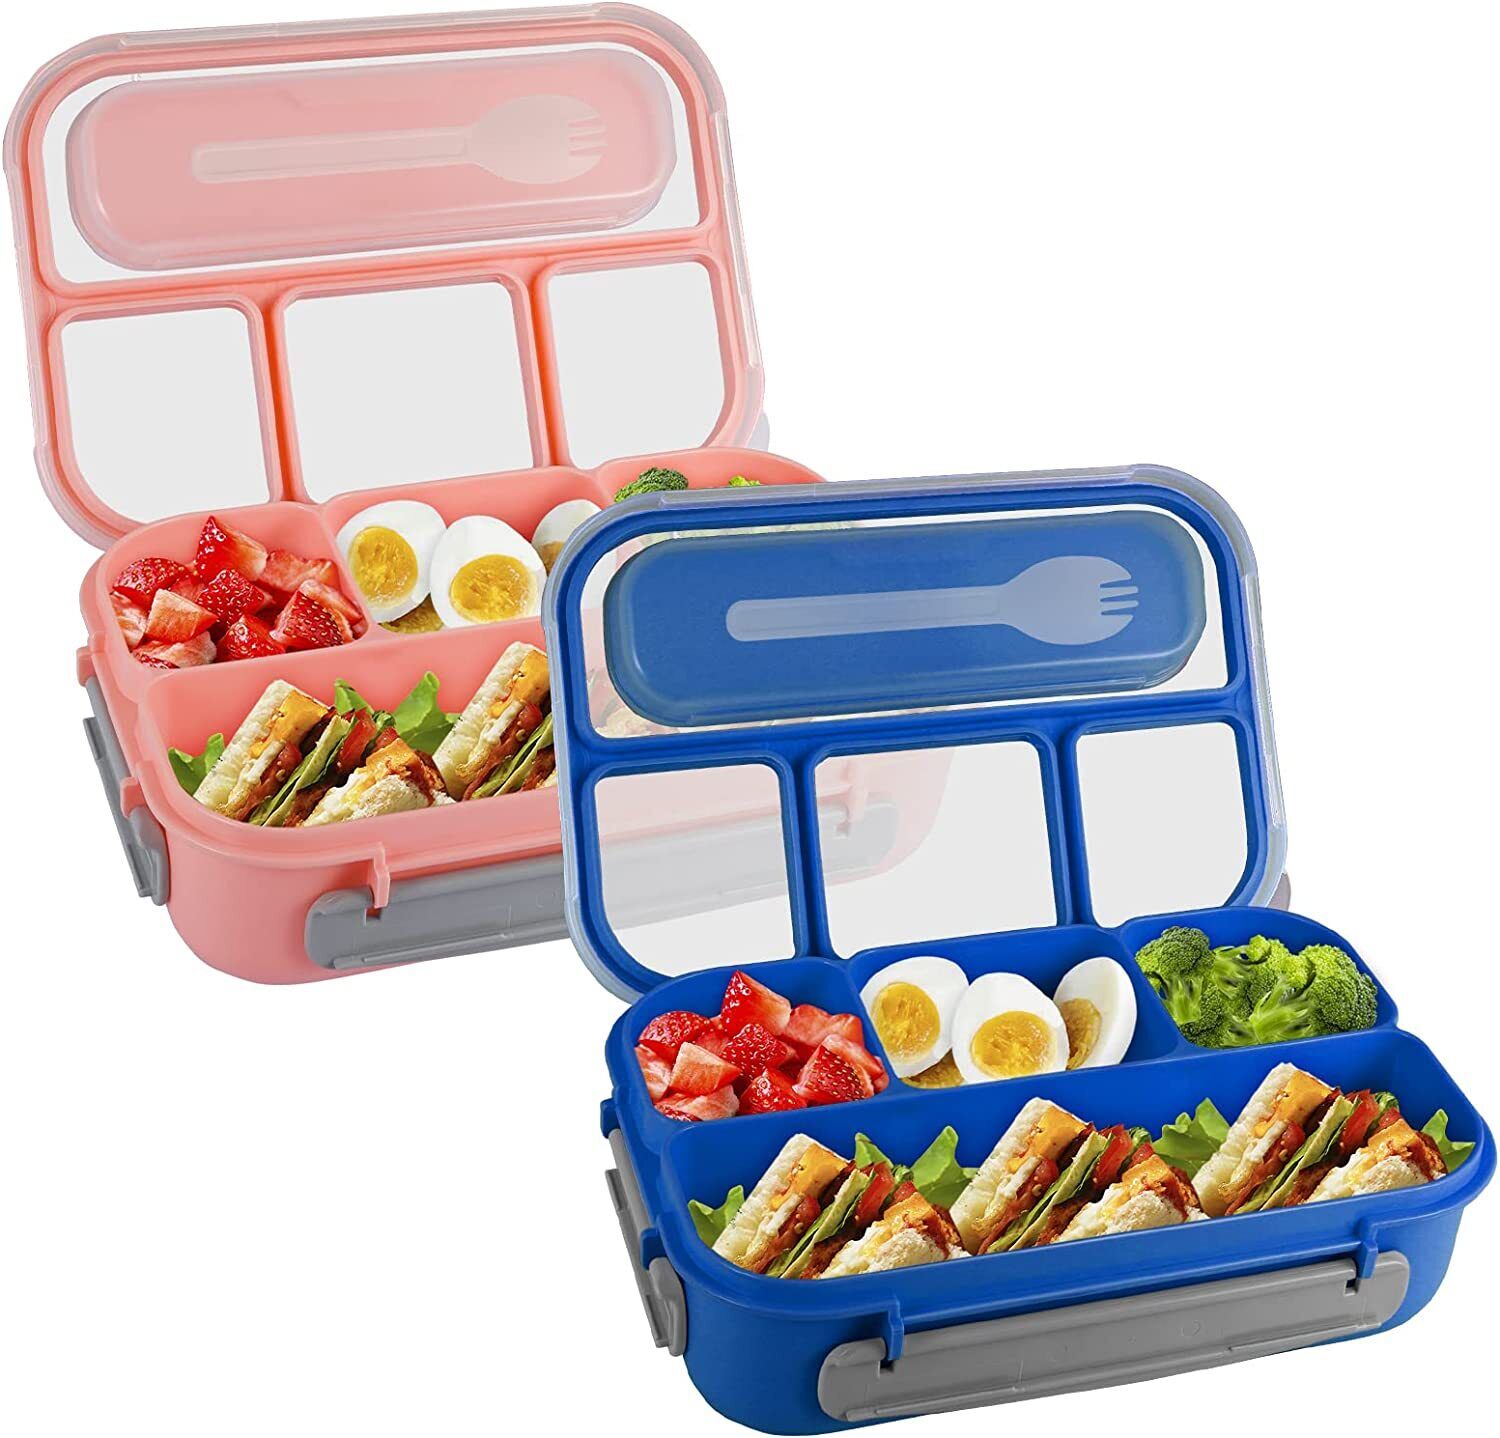 Food Storage Leak-proof With 4 Compartment For Adults Kids